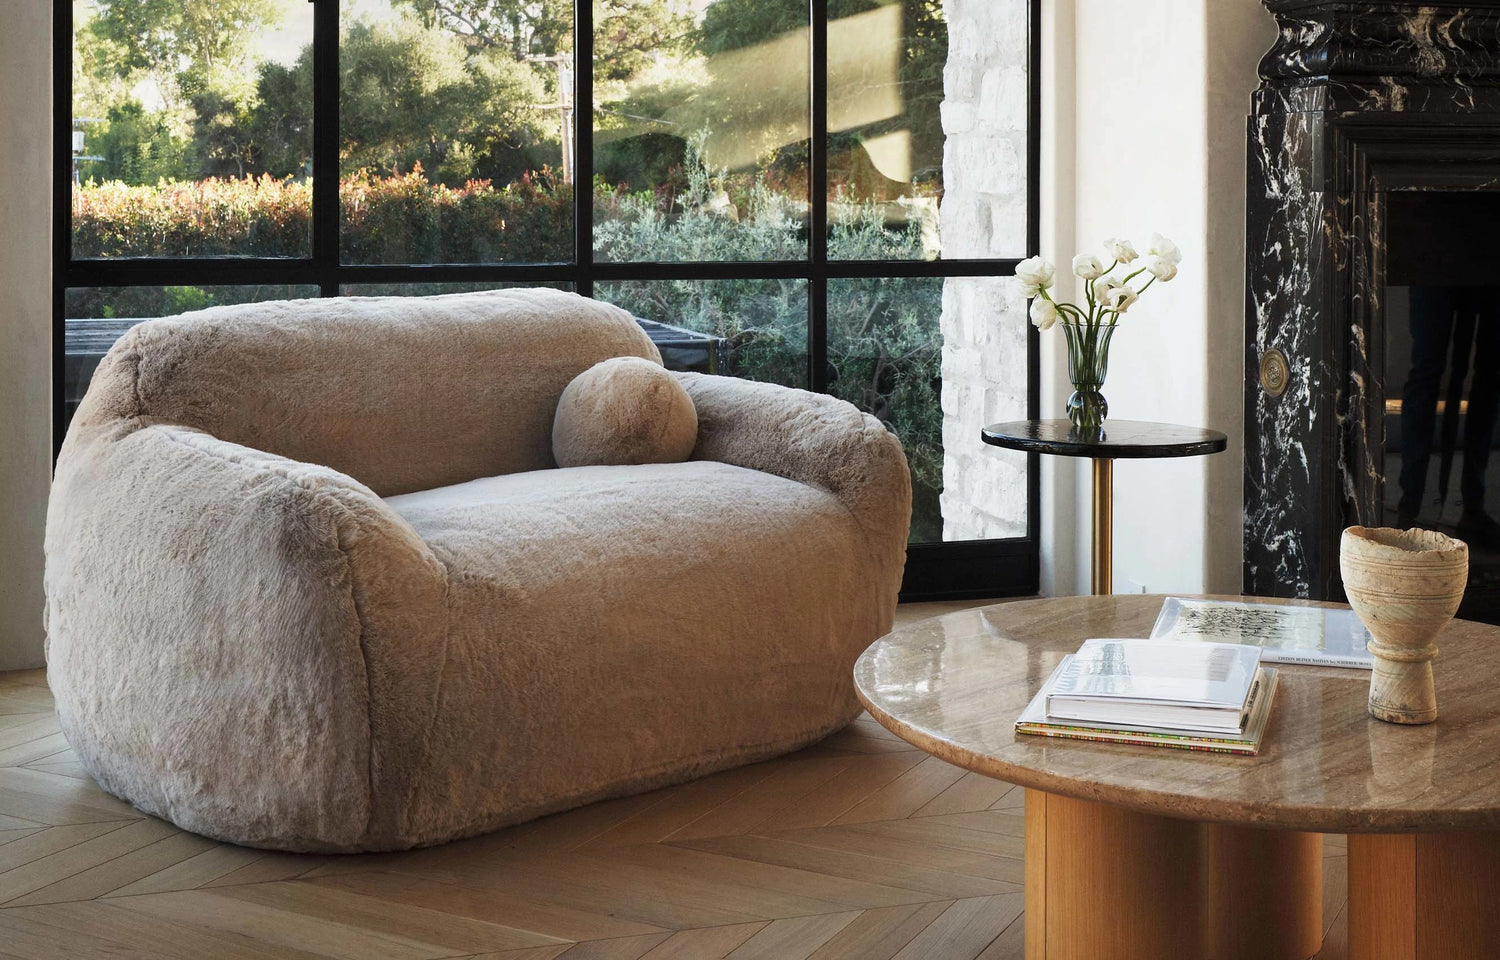 A cozy, plush beige sofa with a matching round cushion sits in a stylish living room with a large window overlooking greenery. A round wooden coffee table with books and a vase, and a small side table with white flowers, complete the scene.